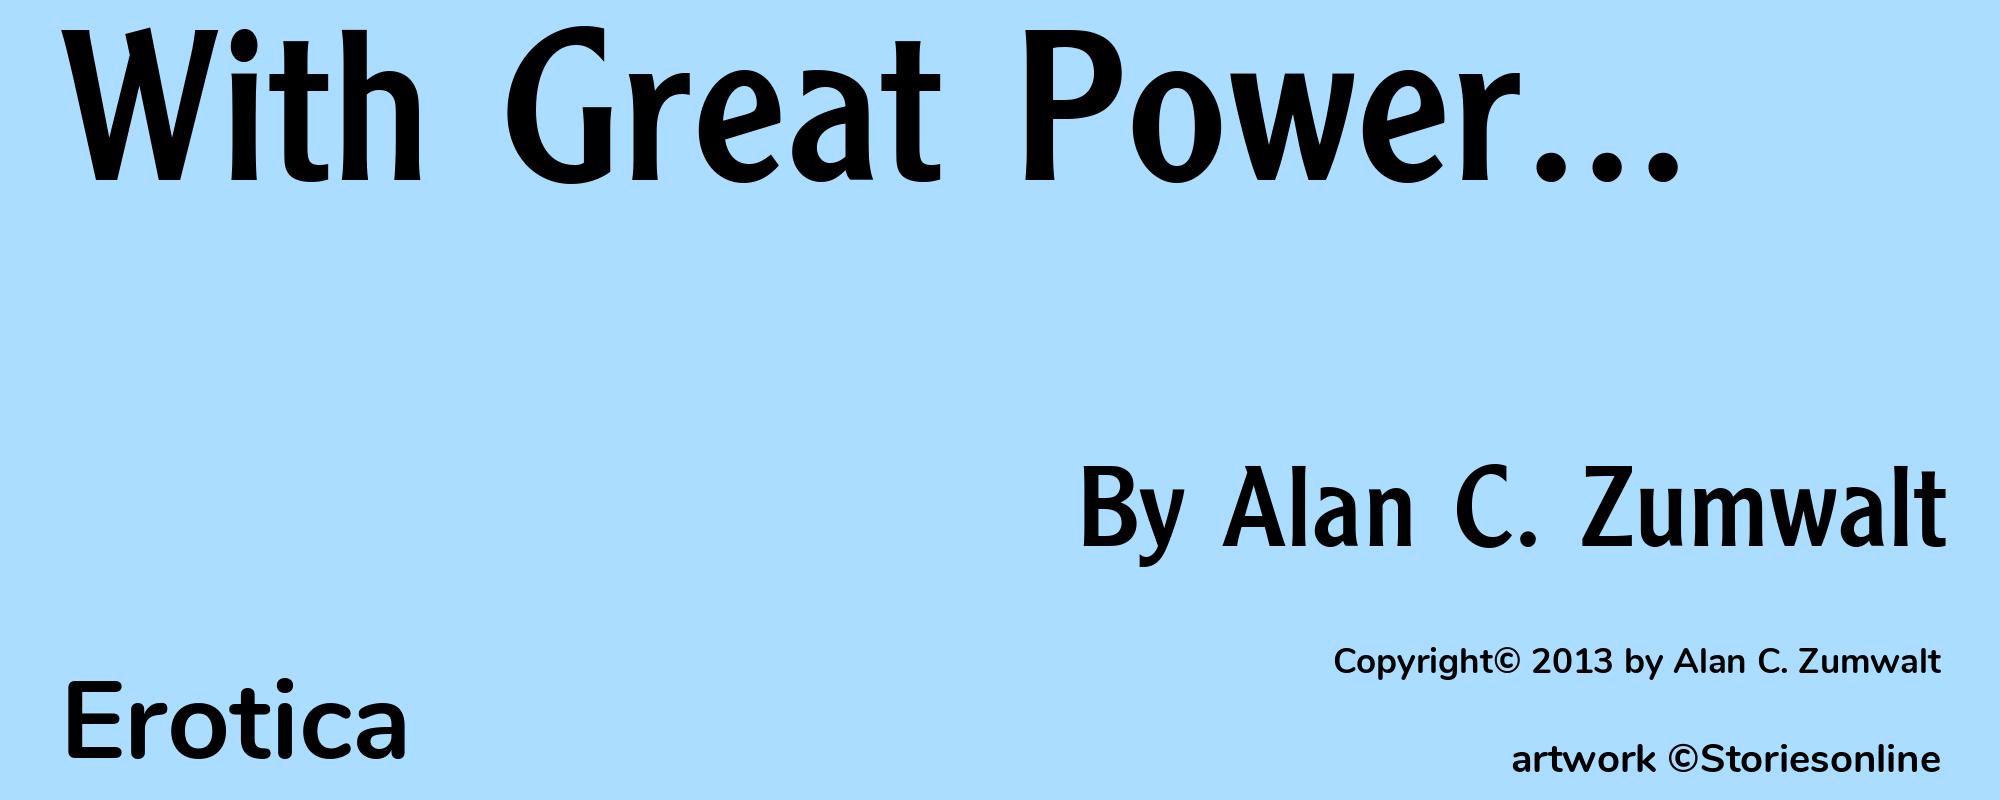 With Great Power... - Cover